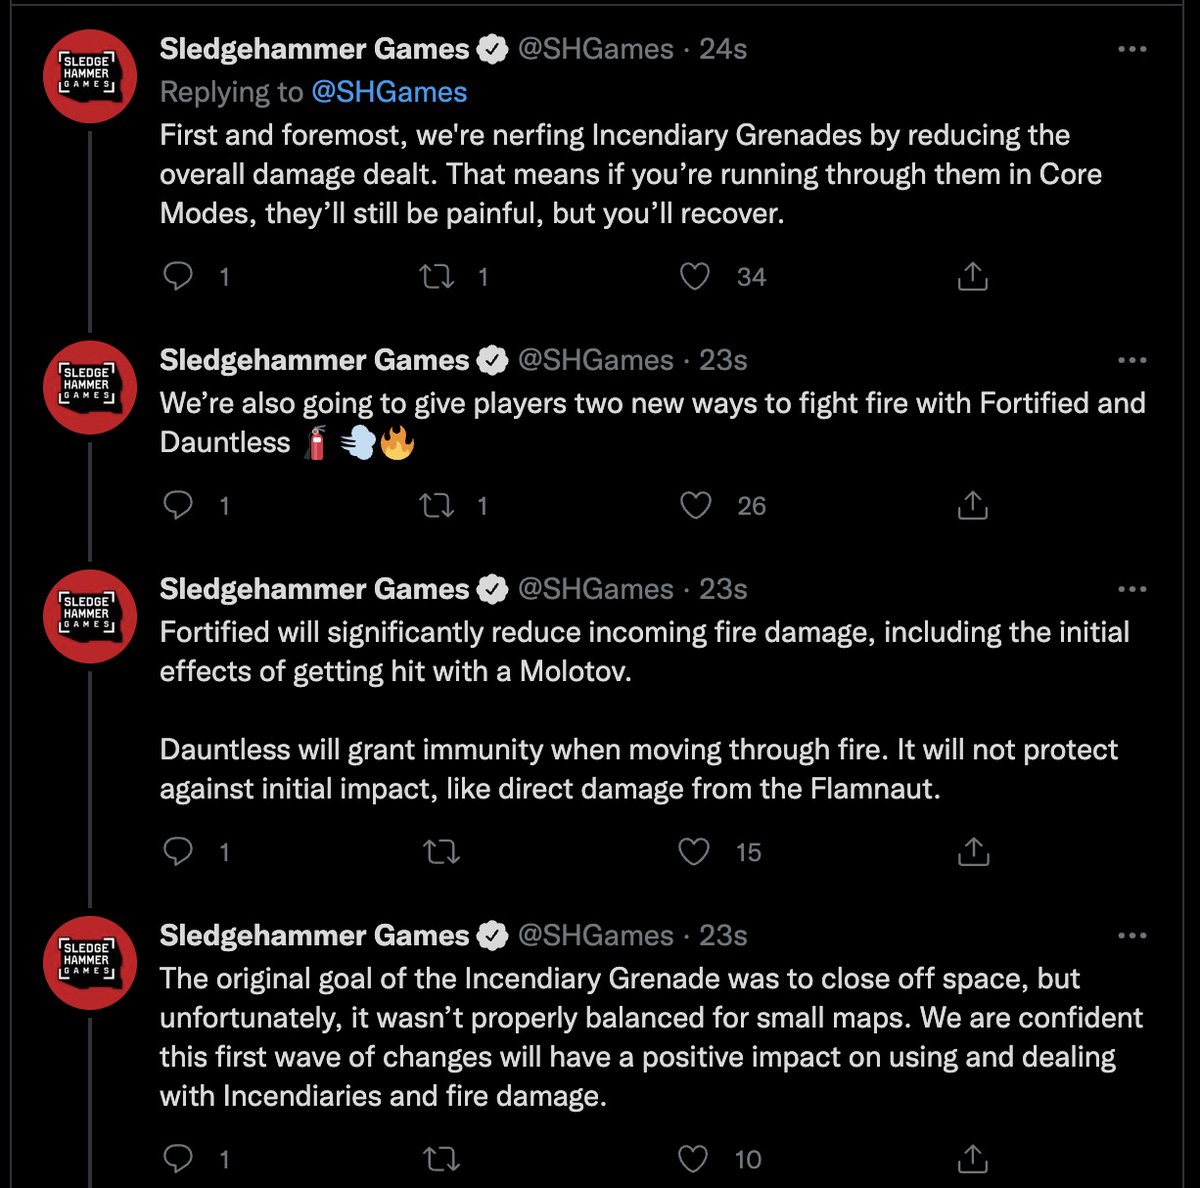 Sledgehammer Games has revealed how they plan to deal with too much fire in #Vanguard. 

Nerfing Incendiaries, Fortified buff, Dauntless changes, and more. https://t.co/nT6FcsEx3H